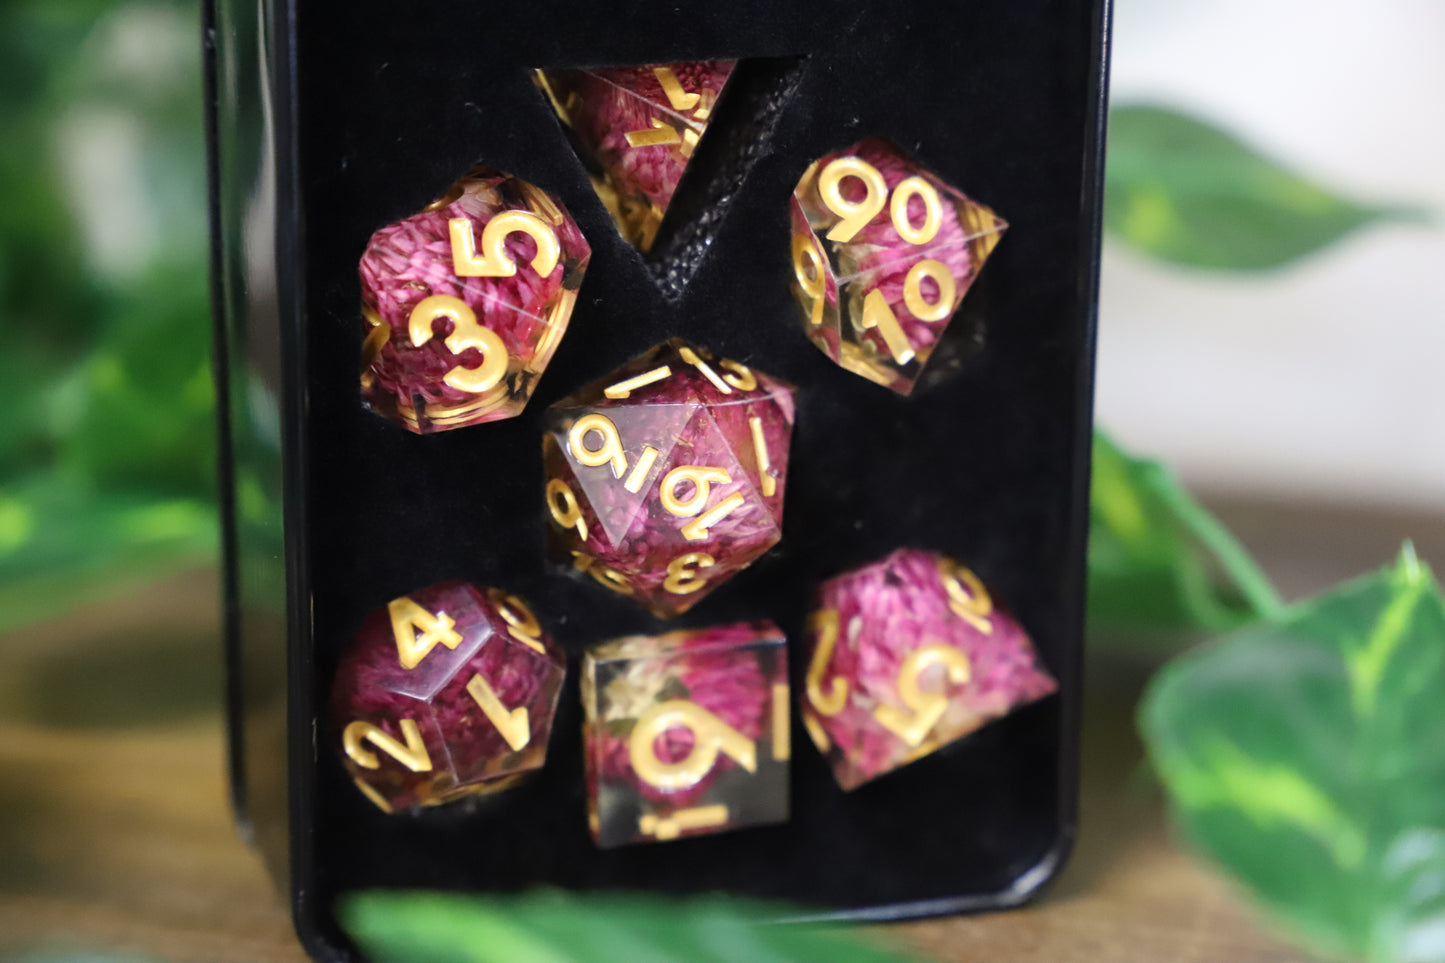 Thousand Day Red - 7 Dice Set